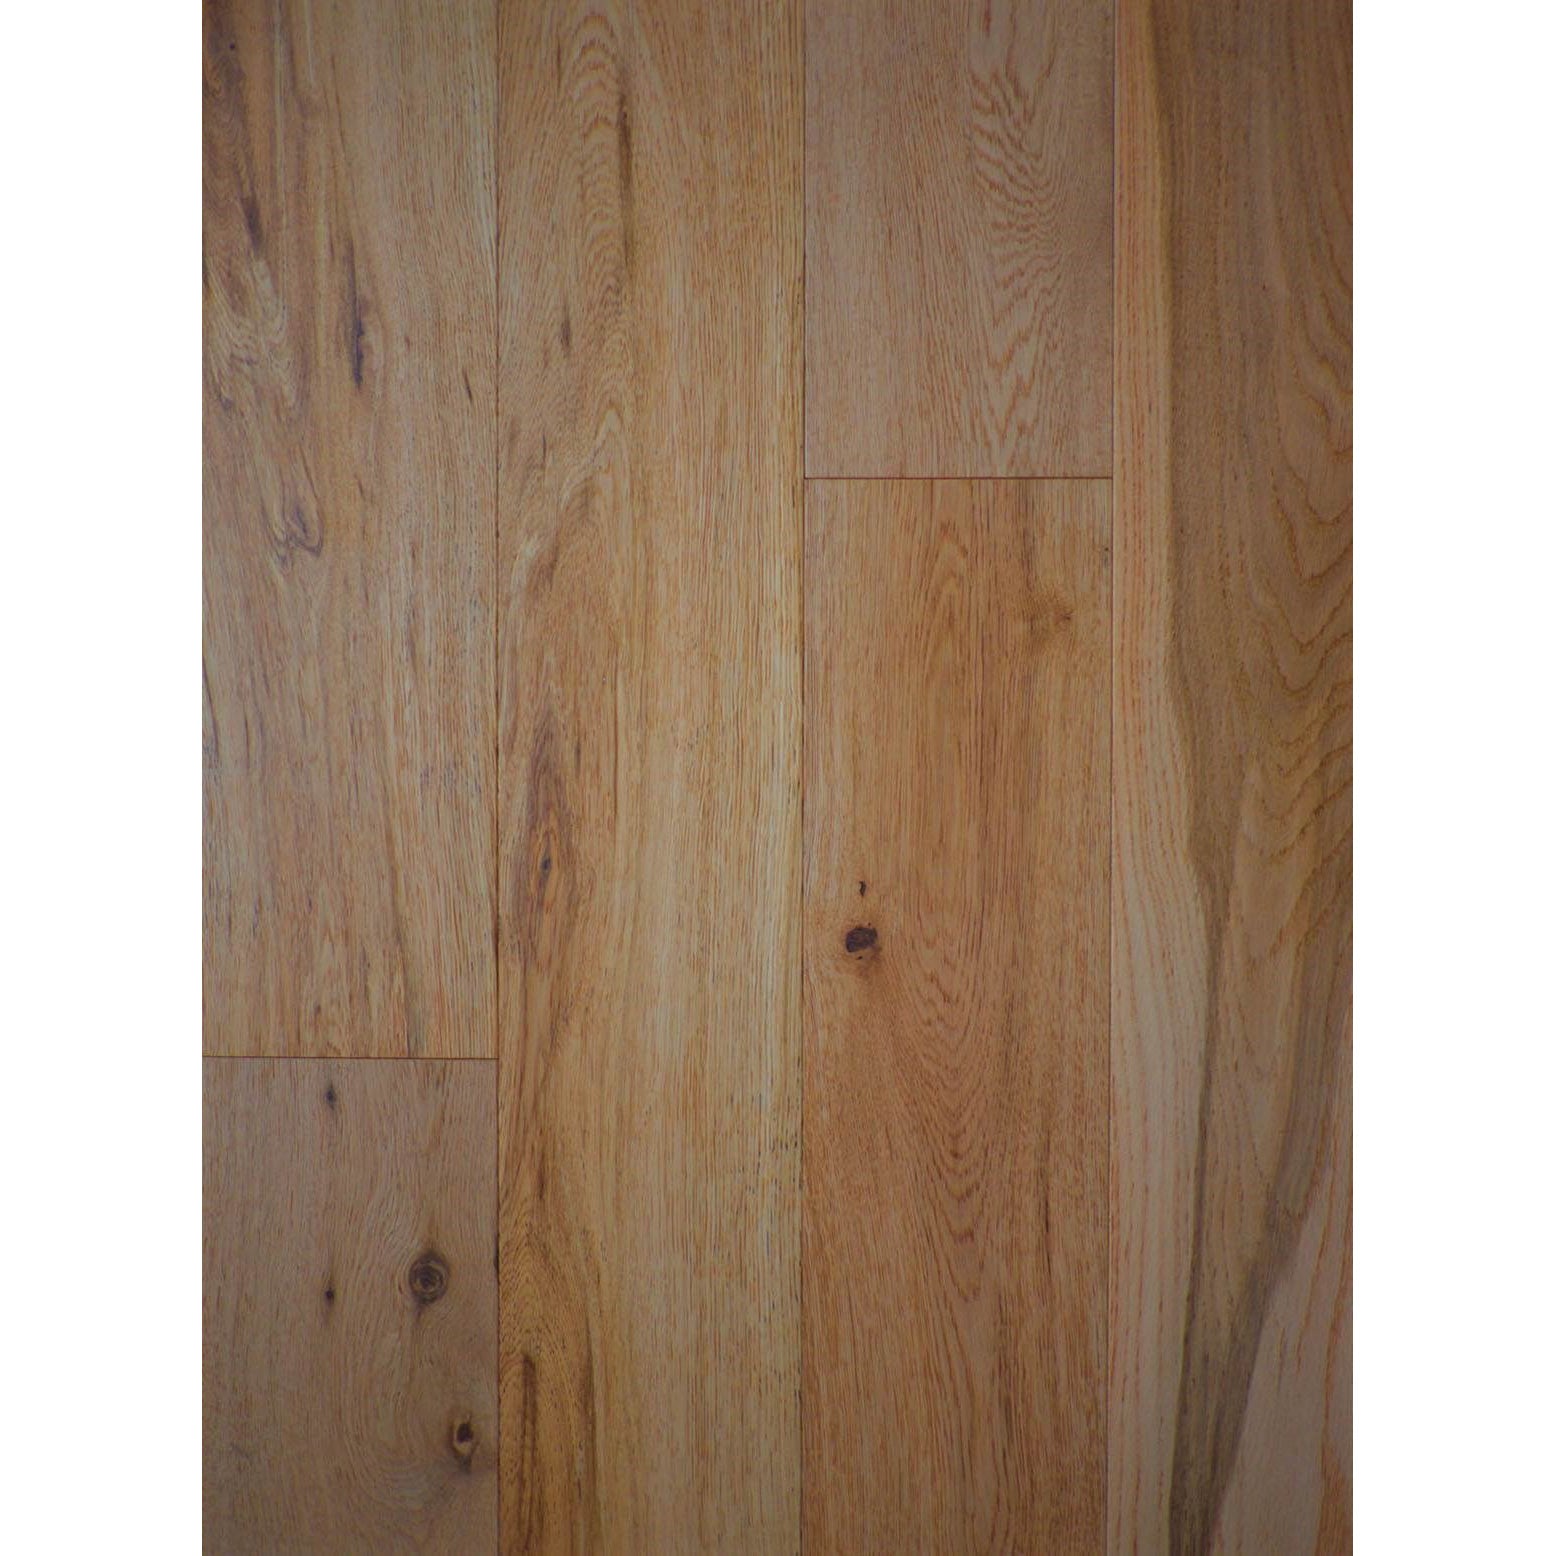 LM Flooring - Valley View - Natural White Oak